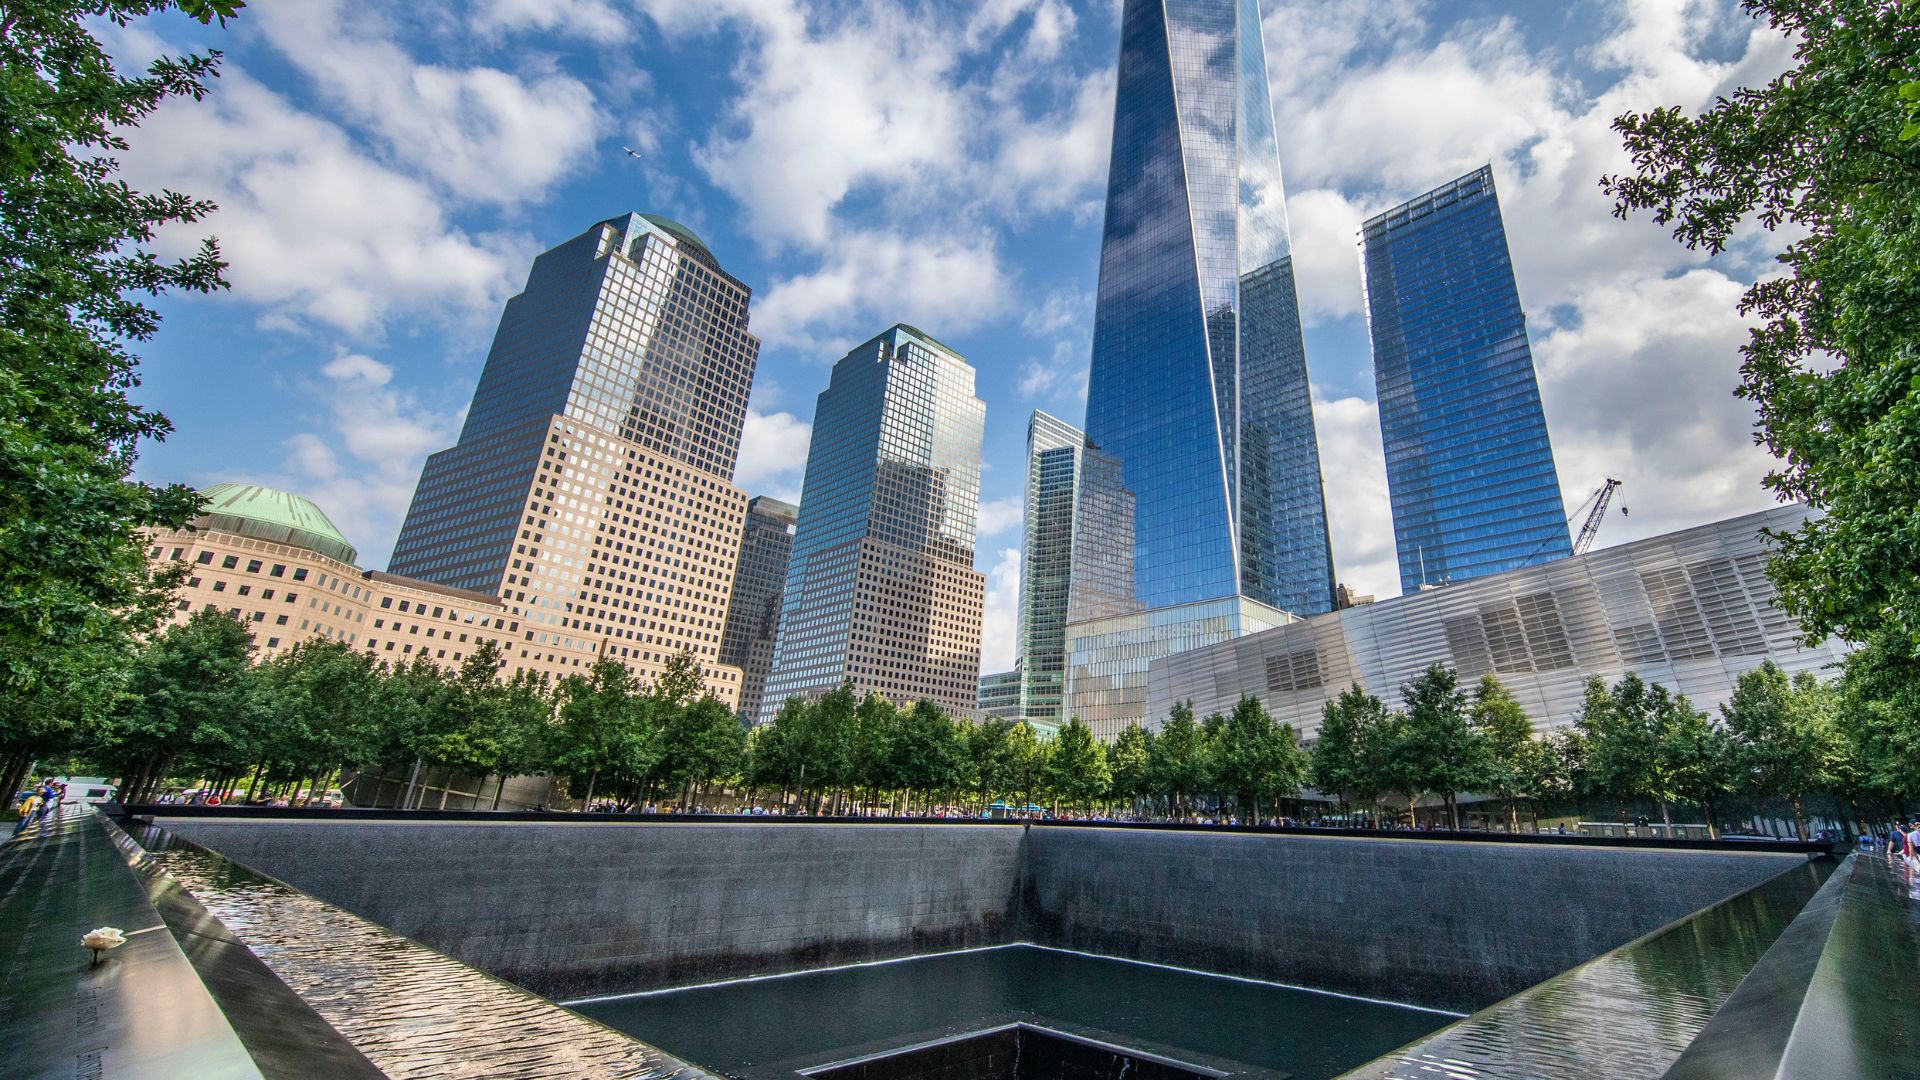 Buildings including One World Trade and green trees surround a Memorial pool, with parapets visible